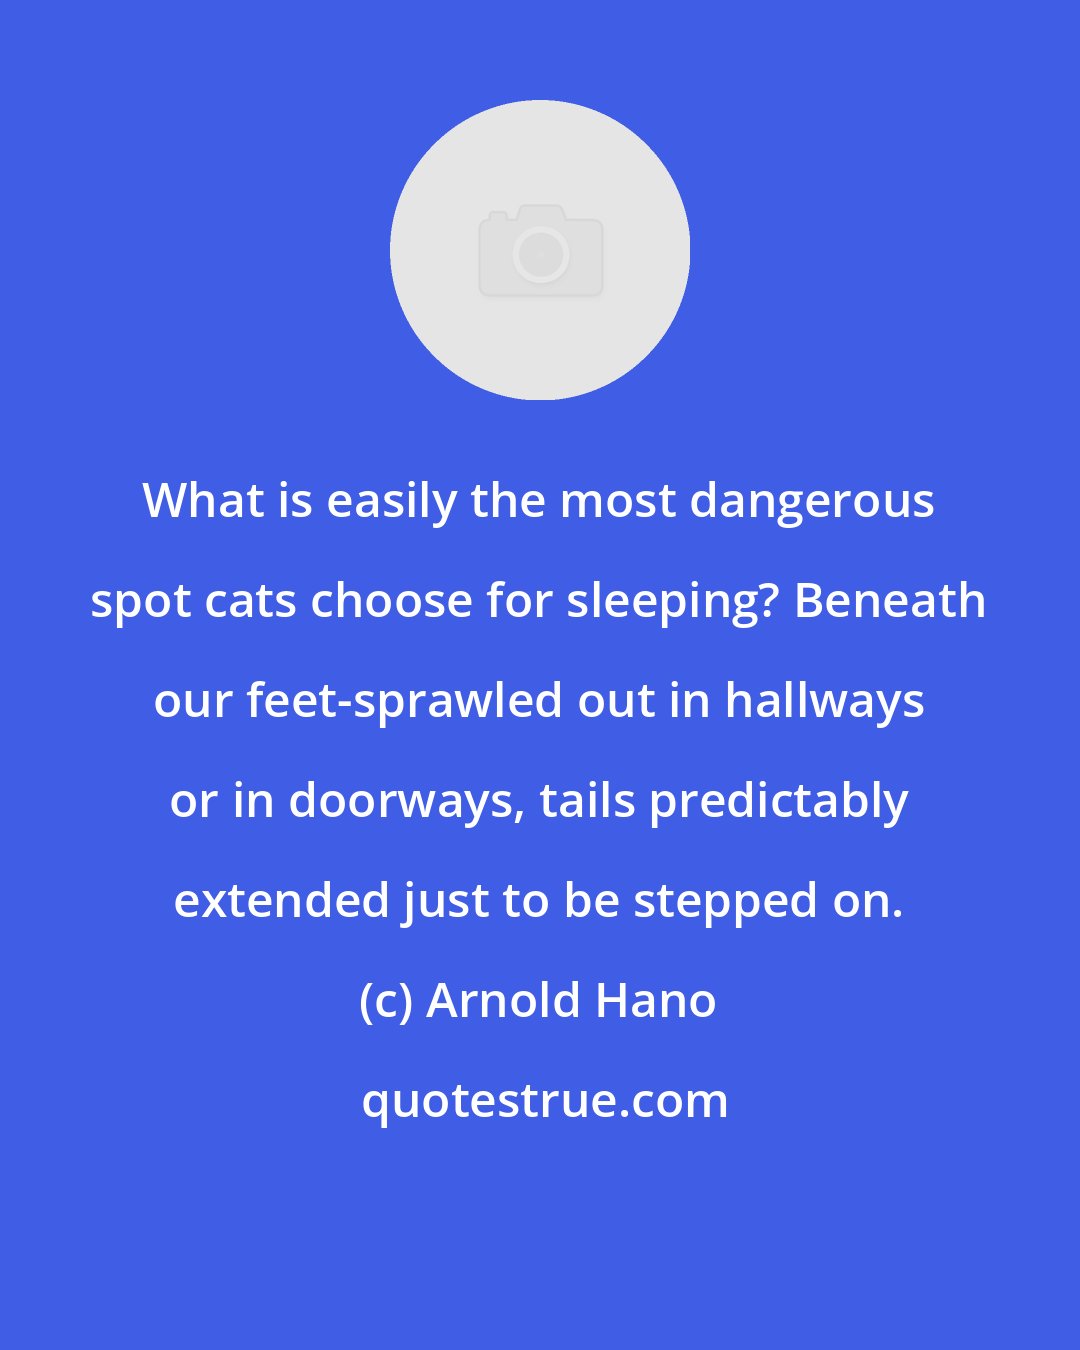 Arnold Hano: What is easily the most dangerous spot cats choose for sleeping? Beneath our feet-sprawled out in hallways or in doorways, tails predictably extended just to be stepped on.